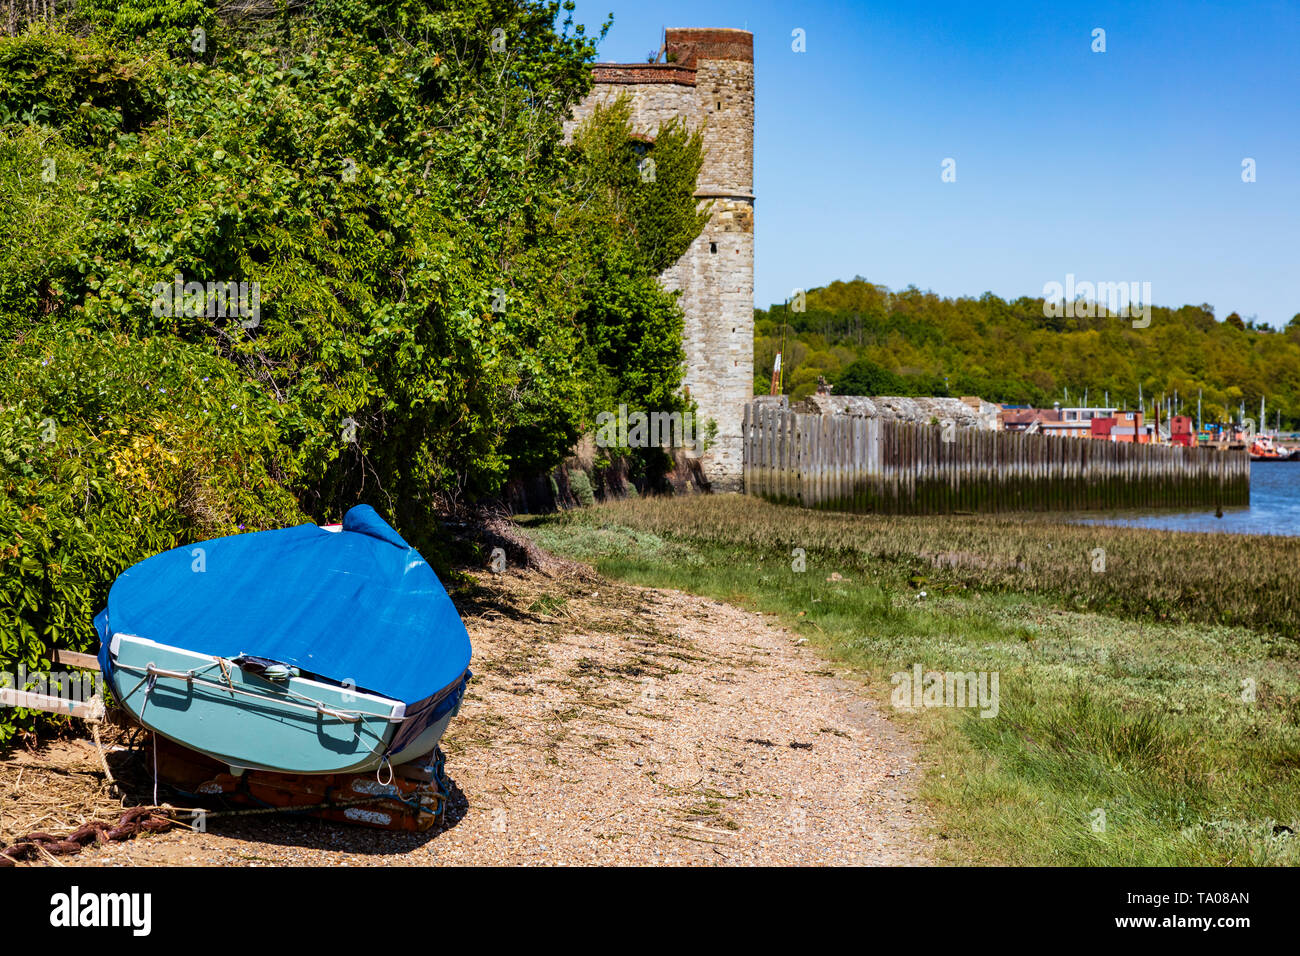 A blue wooden dinghy on the beach below Upnor Castle on the River Medway, Kent, UK Stock Photo